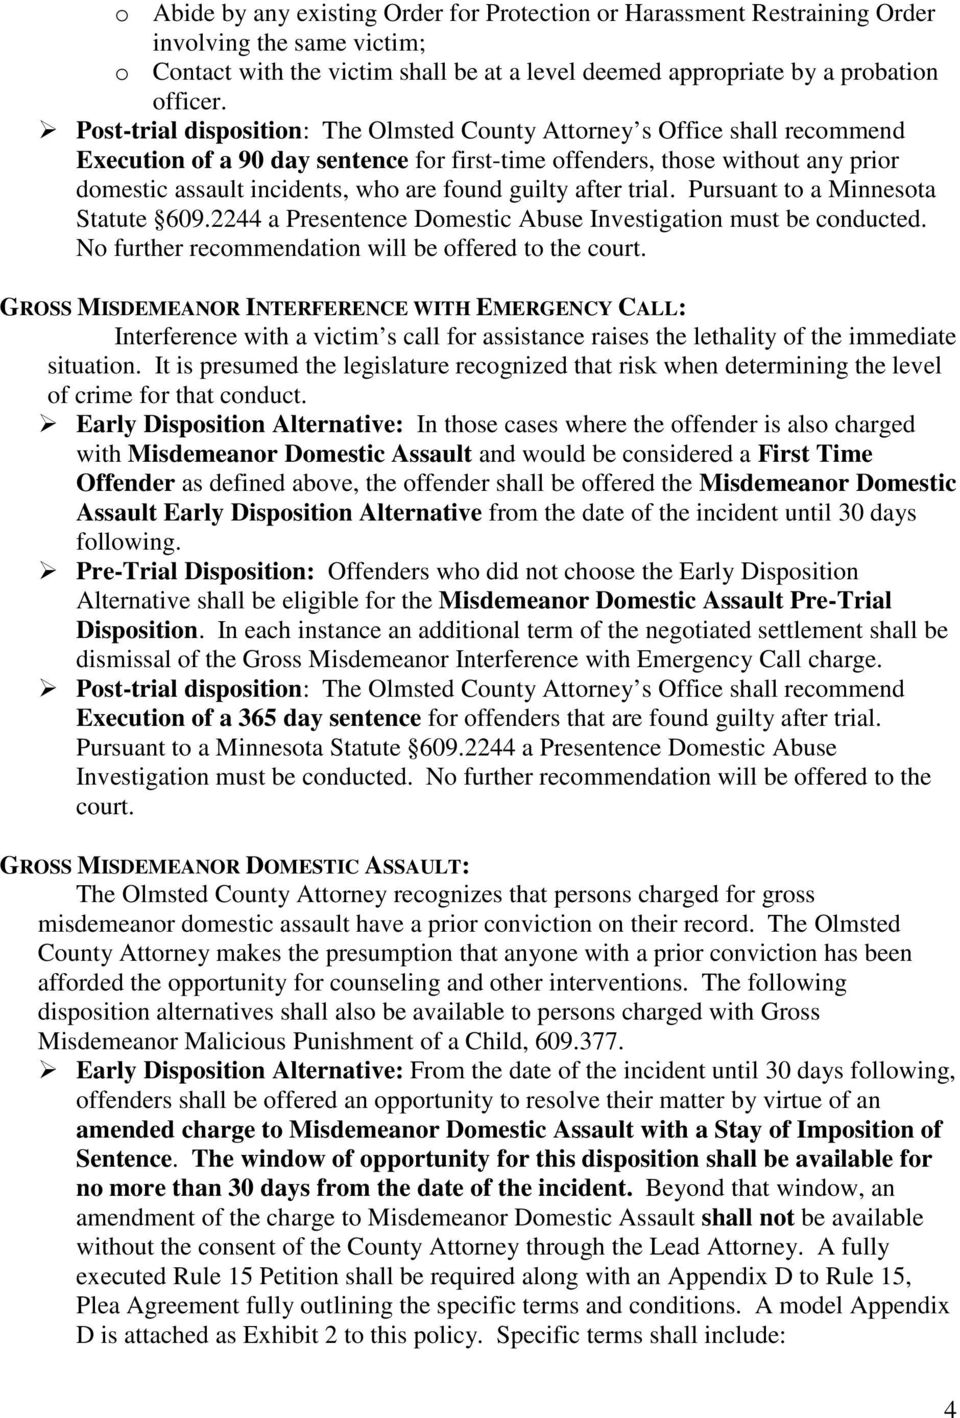 GROSS MISDEMEANOR INTERFERENCE WITH EMERGENCY CALL: Interference with a victim s call for assistance raises the lethality of the immediate situation.